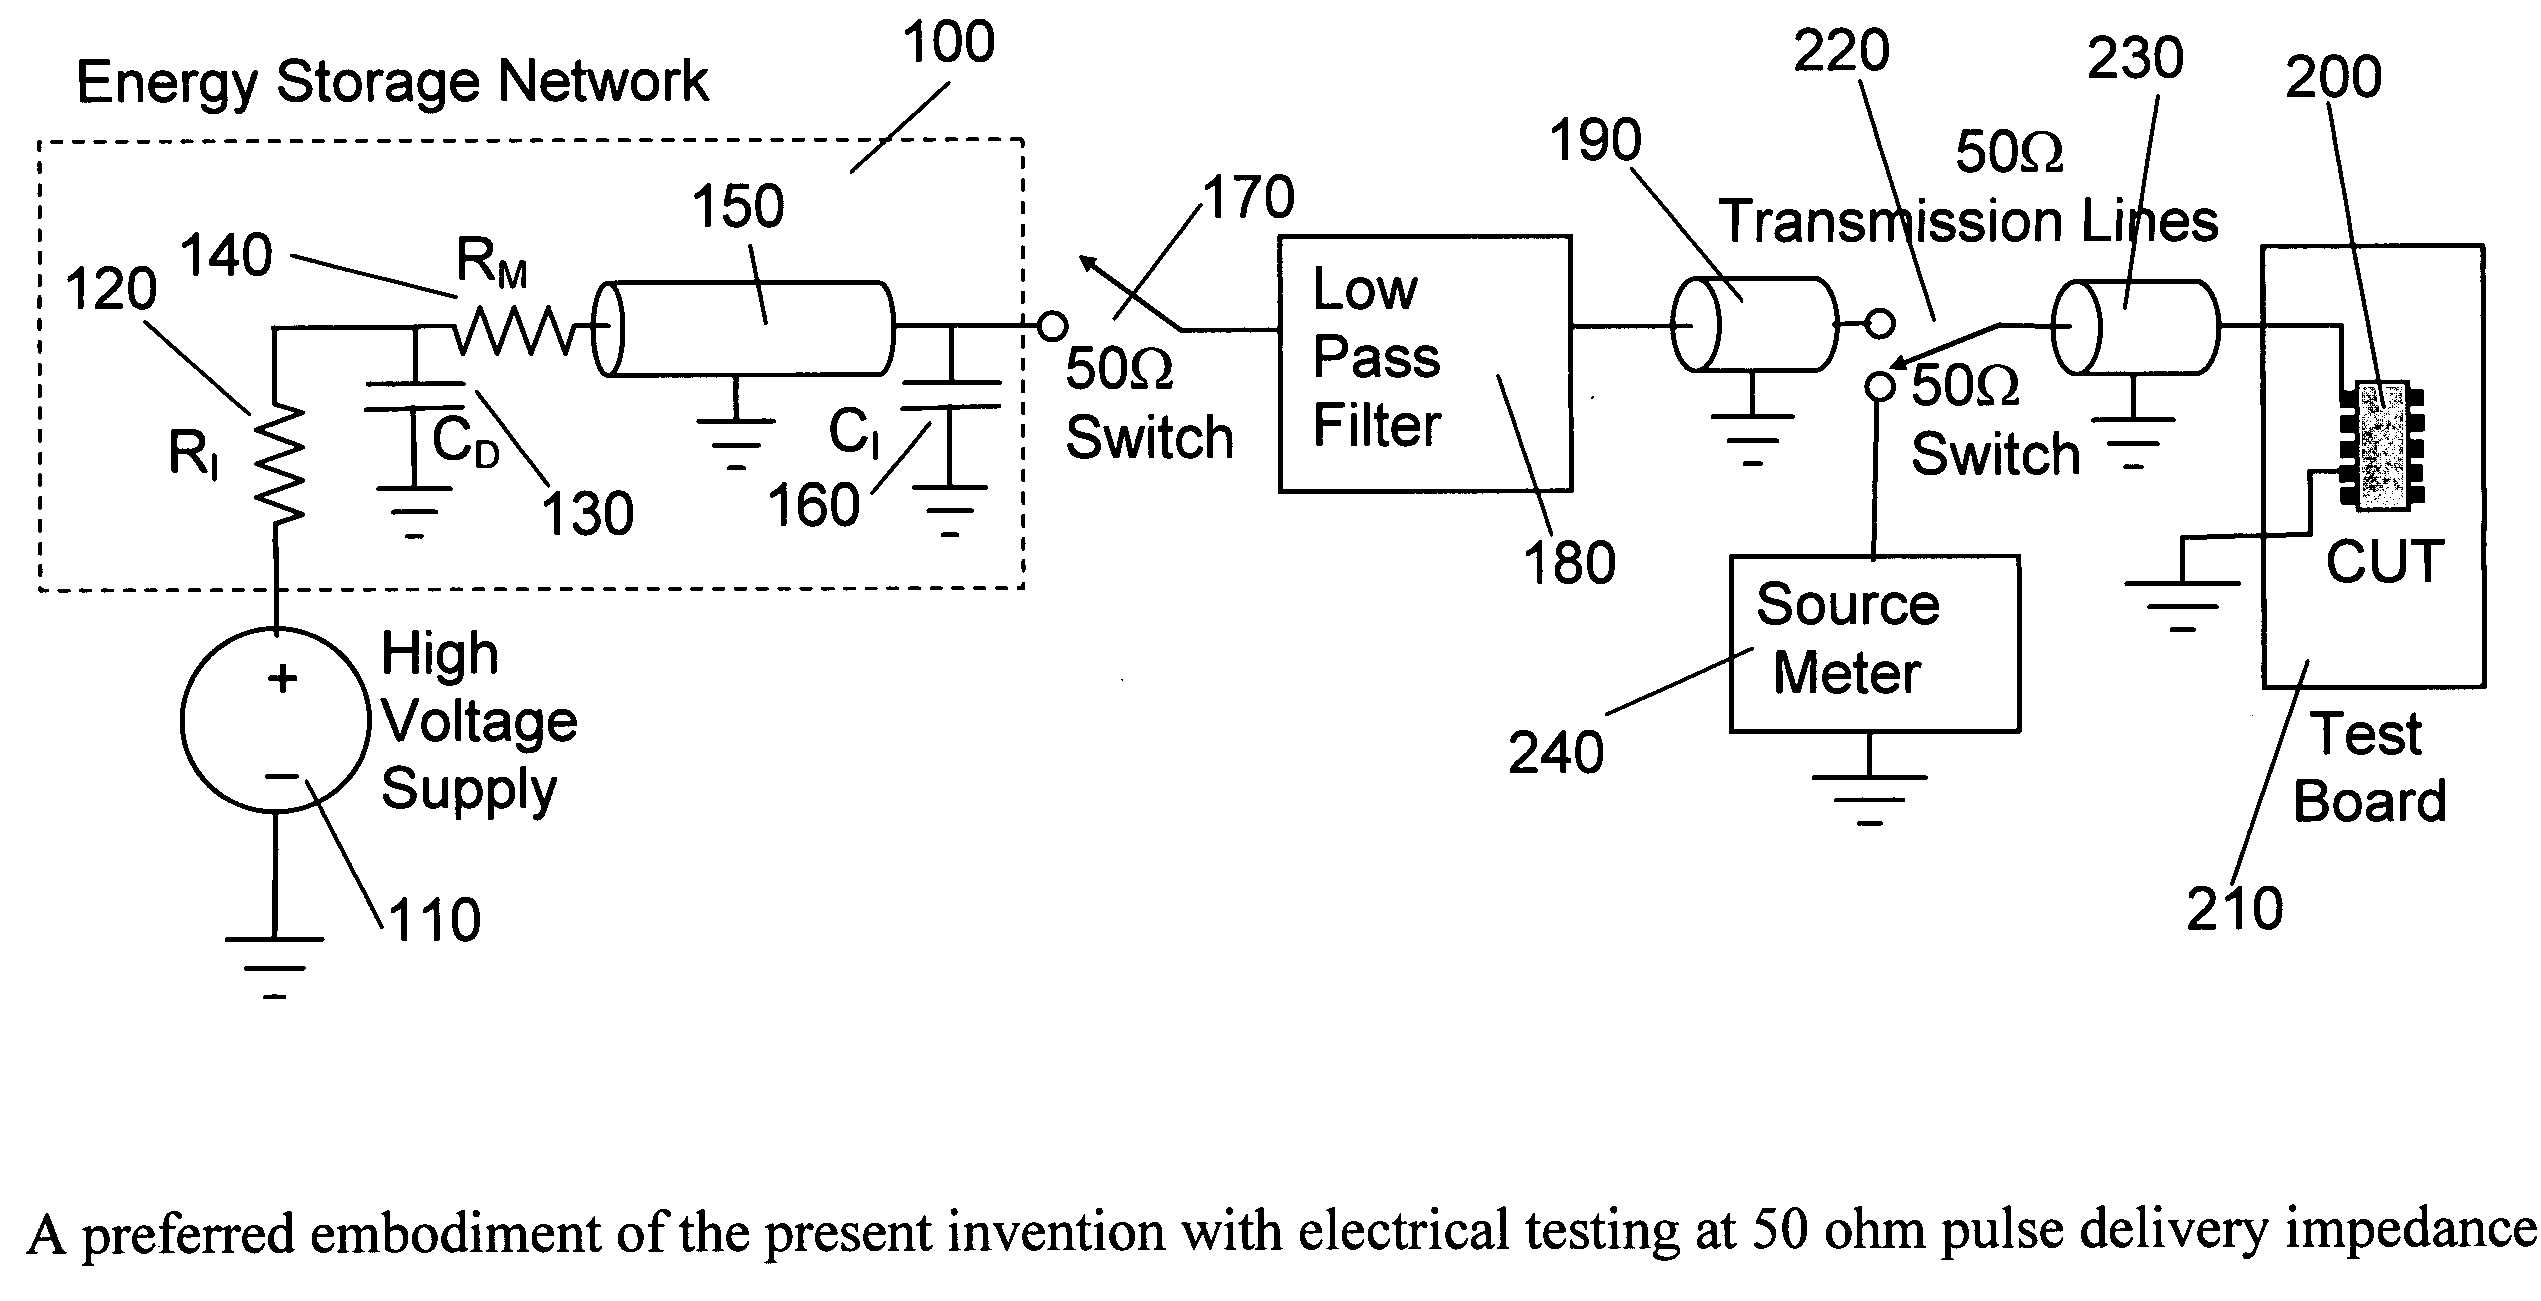 Test circuits and current pulse generator for simulating an electostatic discharge